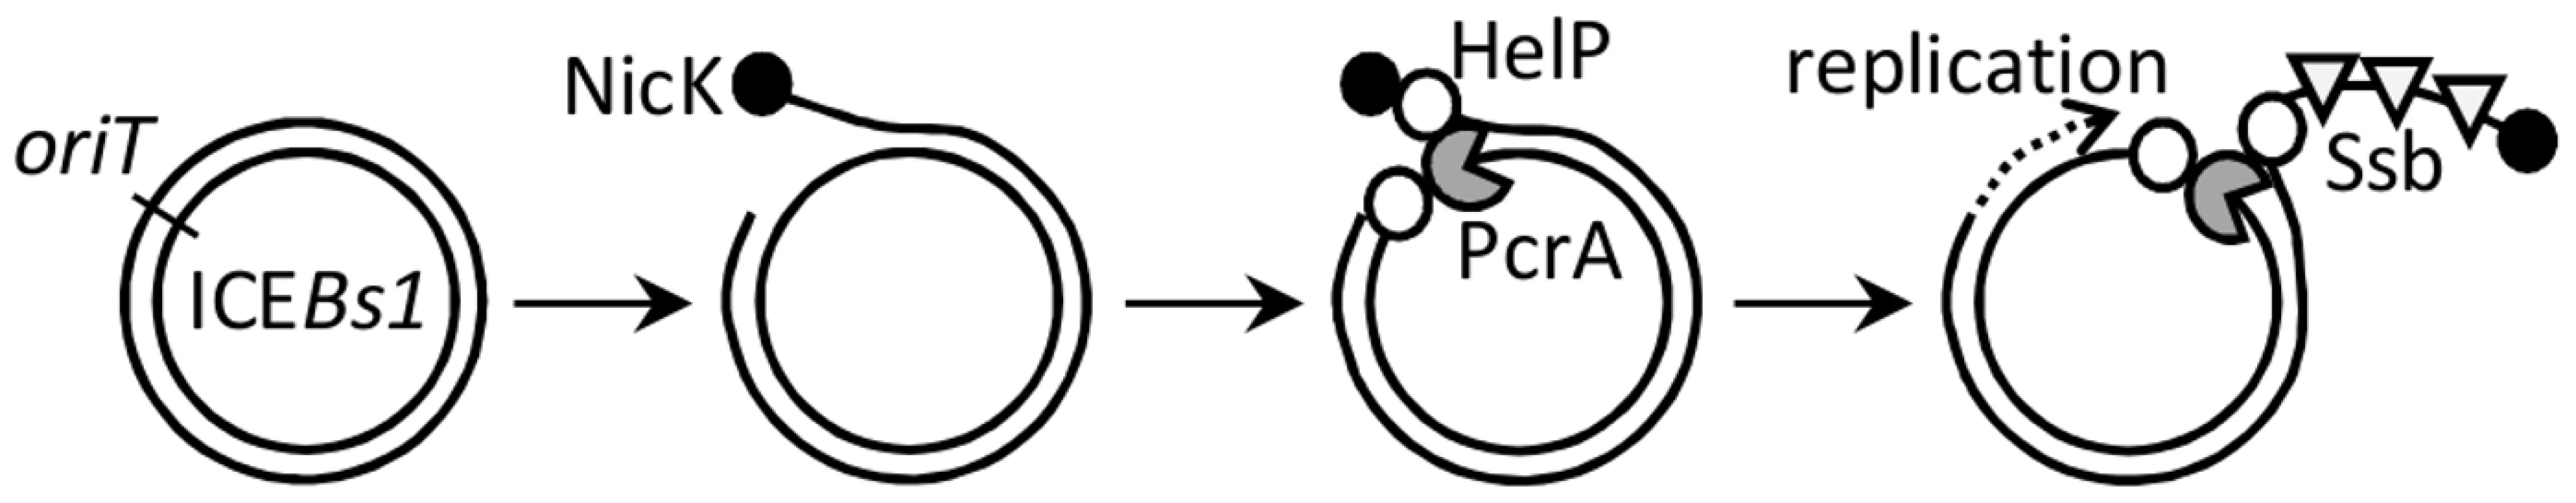 Model for association of the relaxase, helicase, HelP, and Ssb with ICE<i>Bs1</i> DNA.